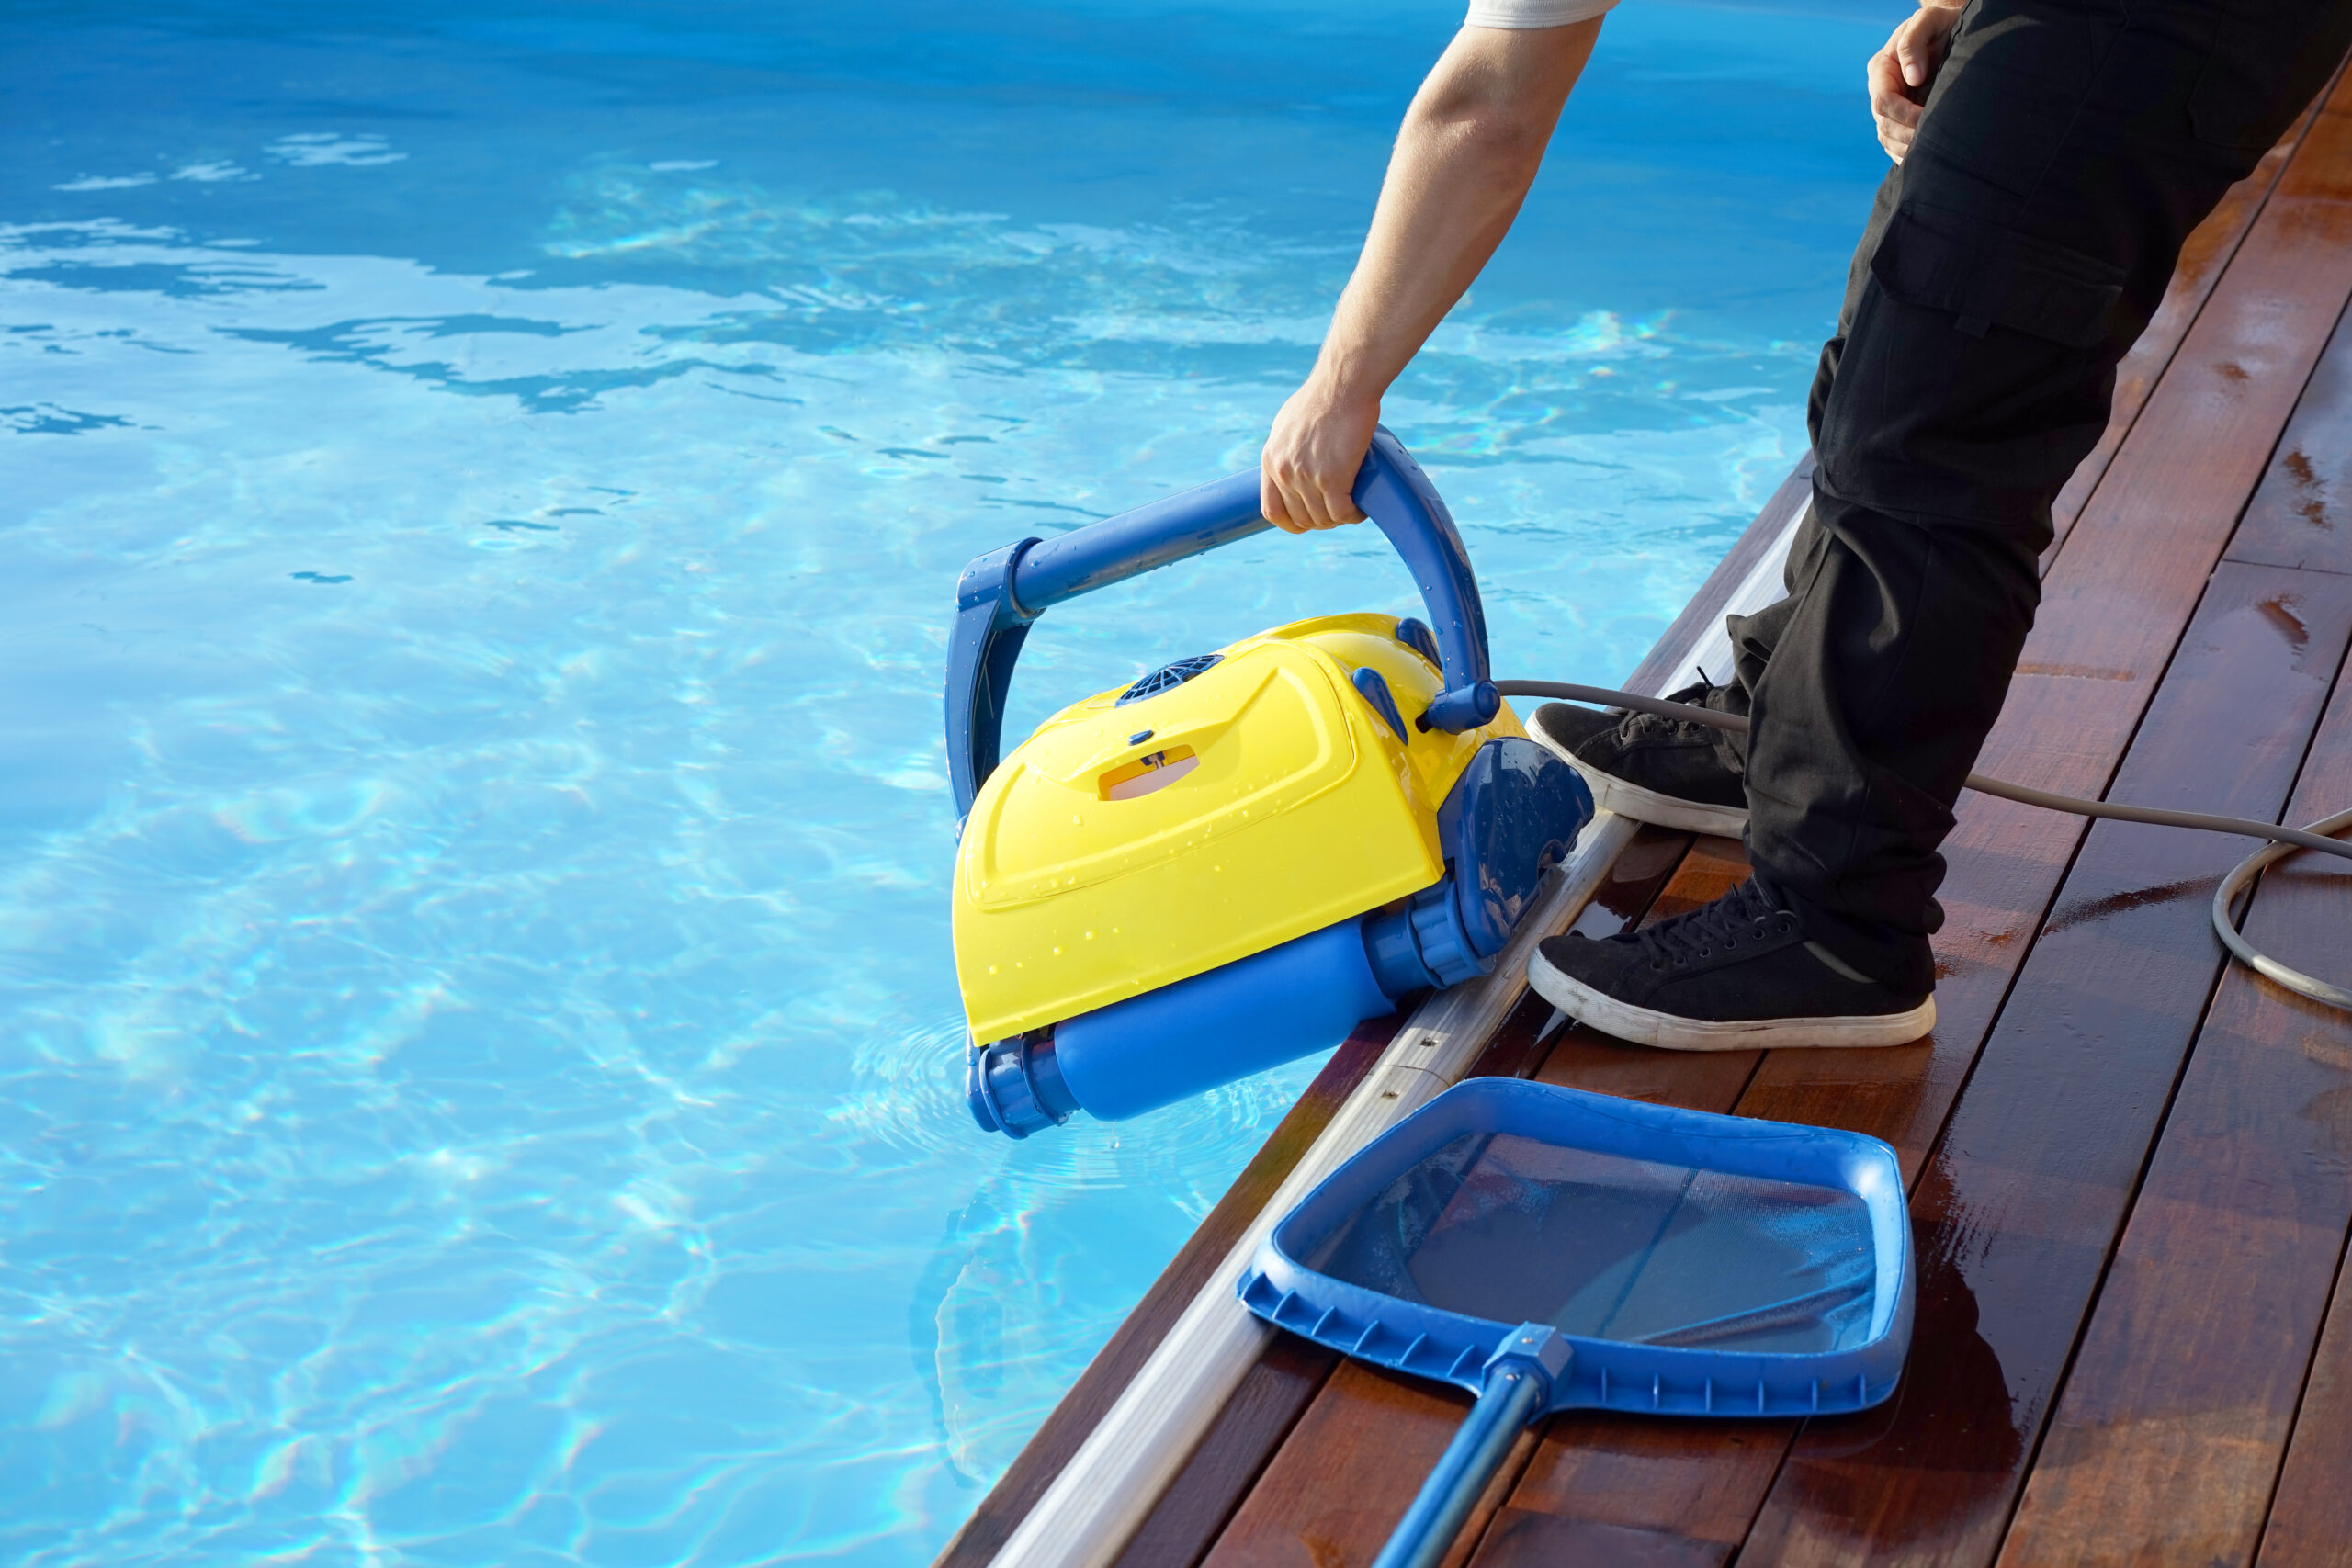 Man holding a pool vacuum or brush machine, ready to clean the pool's surface